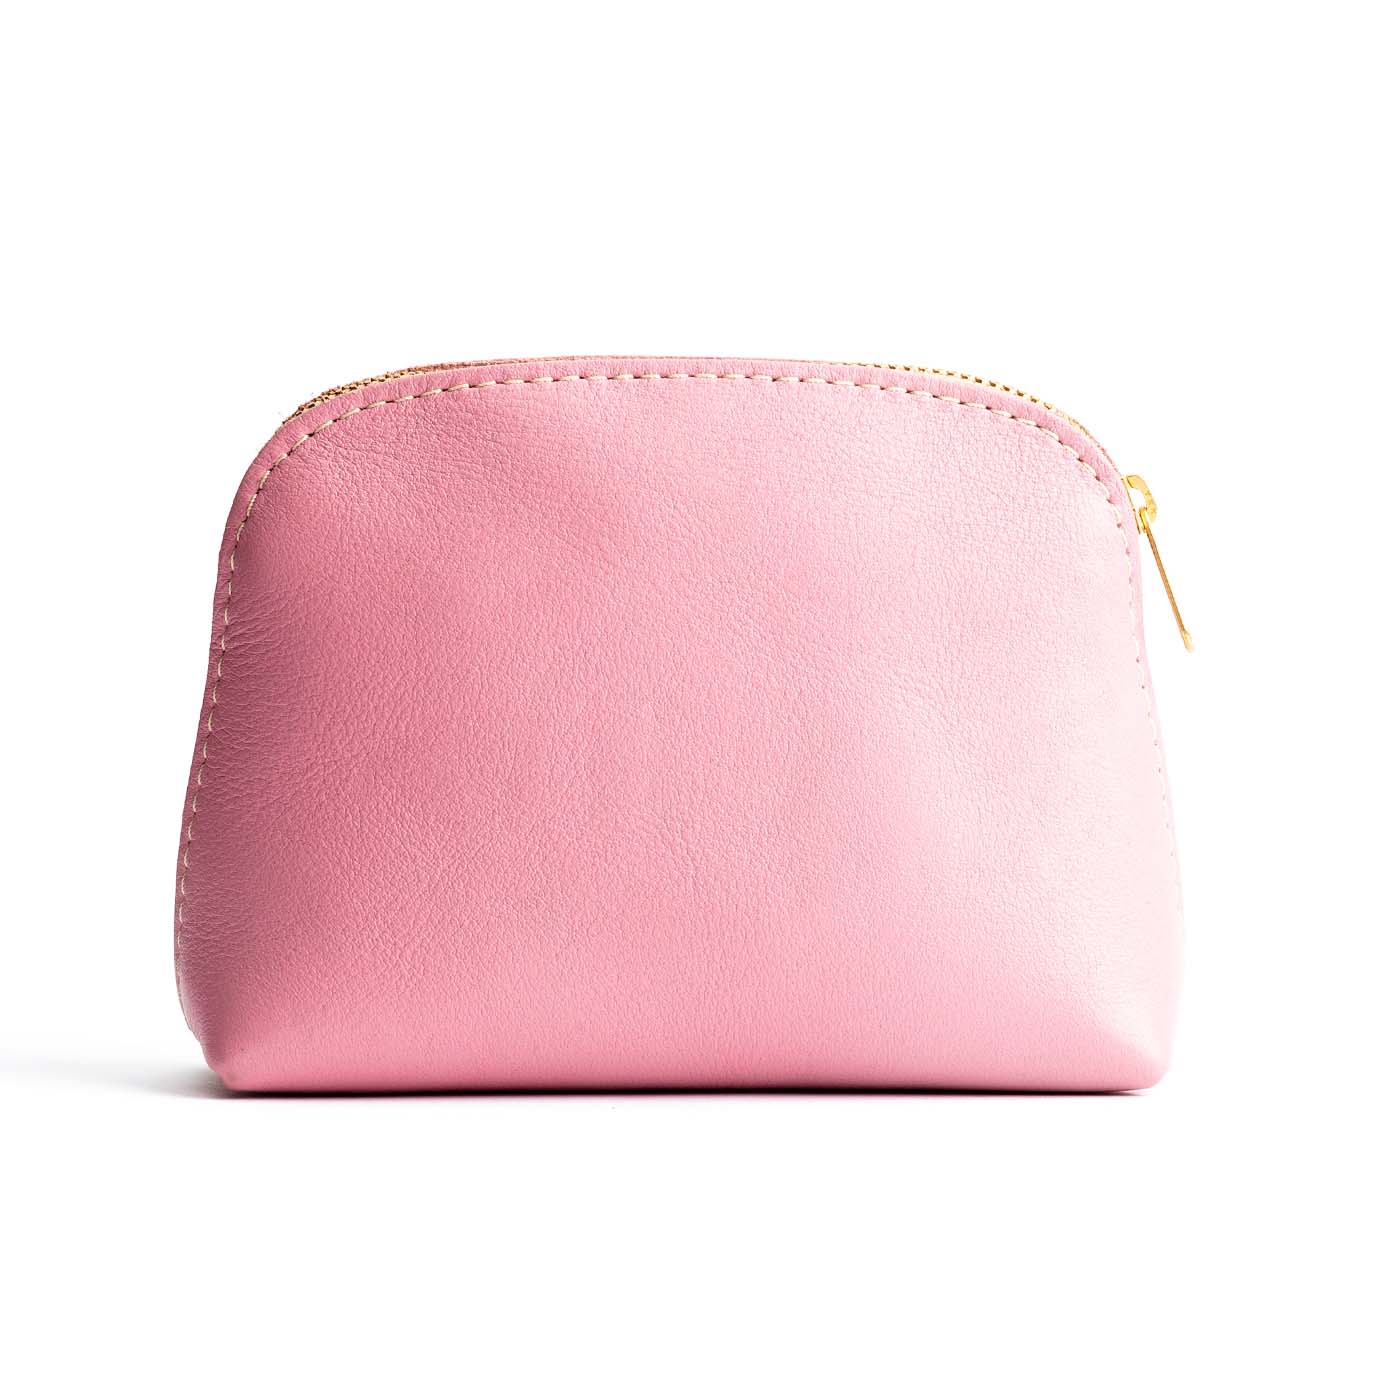 Vintage Pink*Classic | Compact leather pouch with top zipper